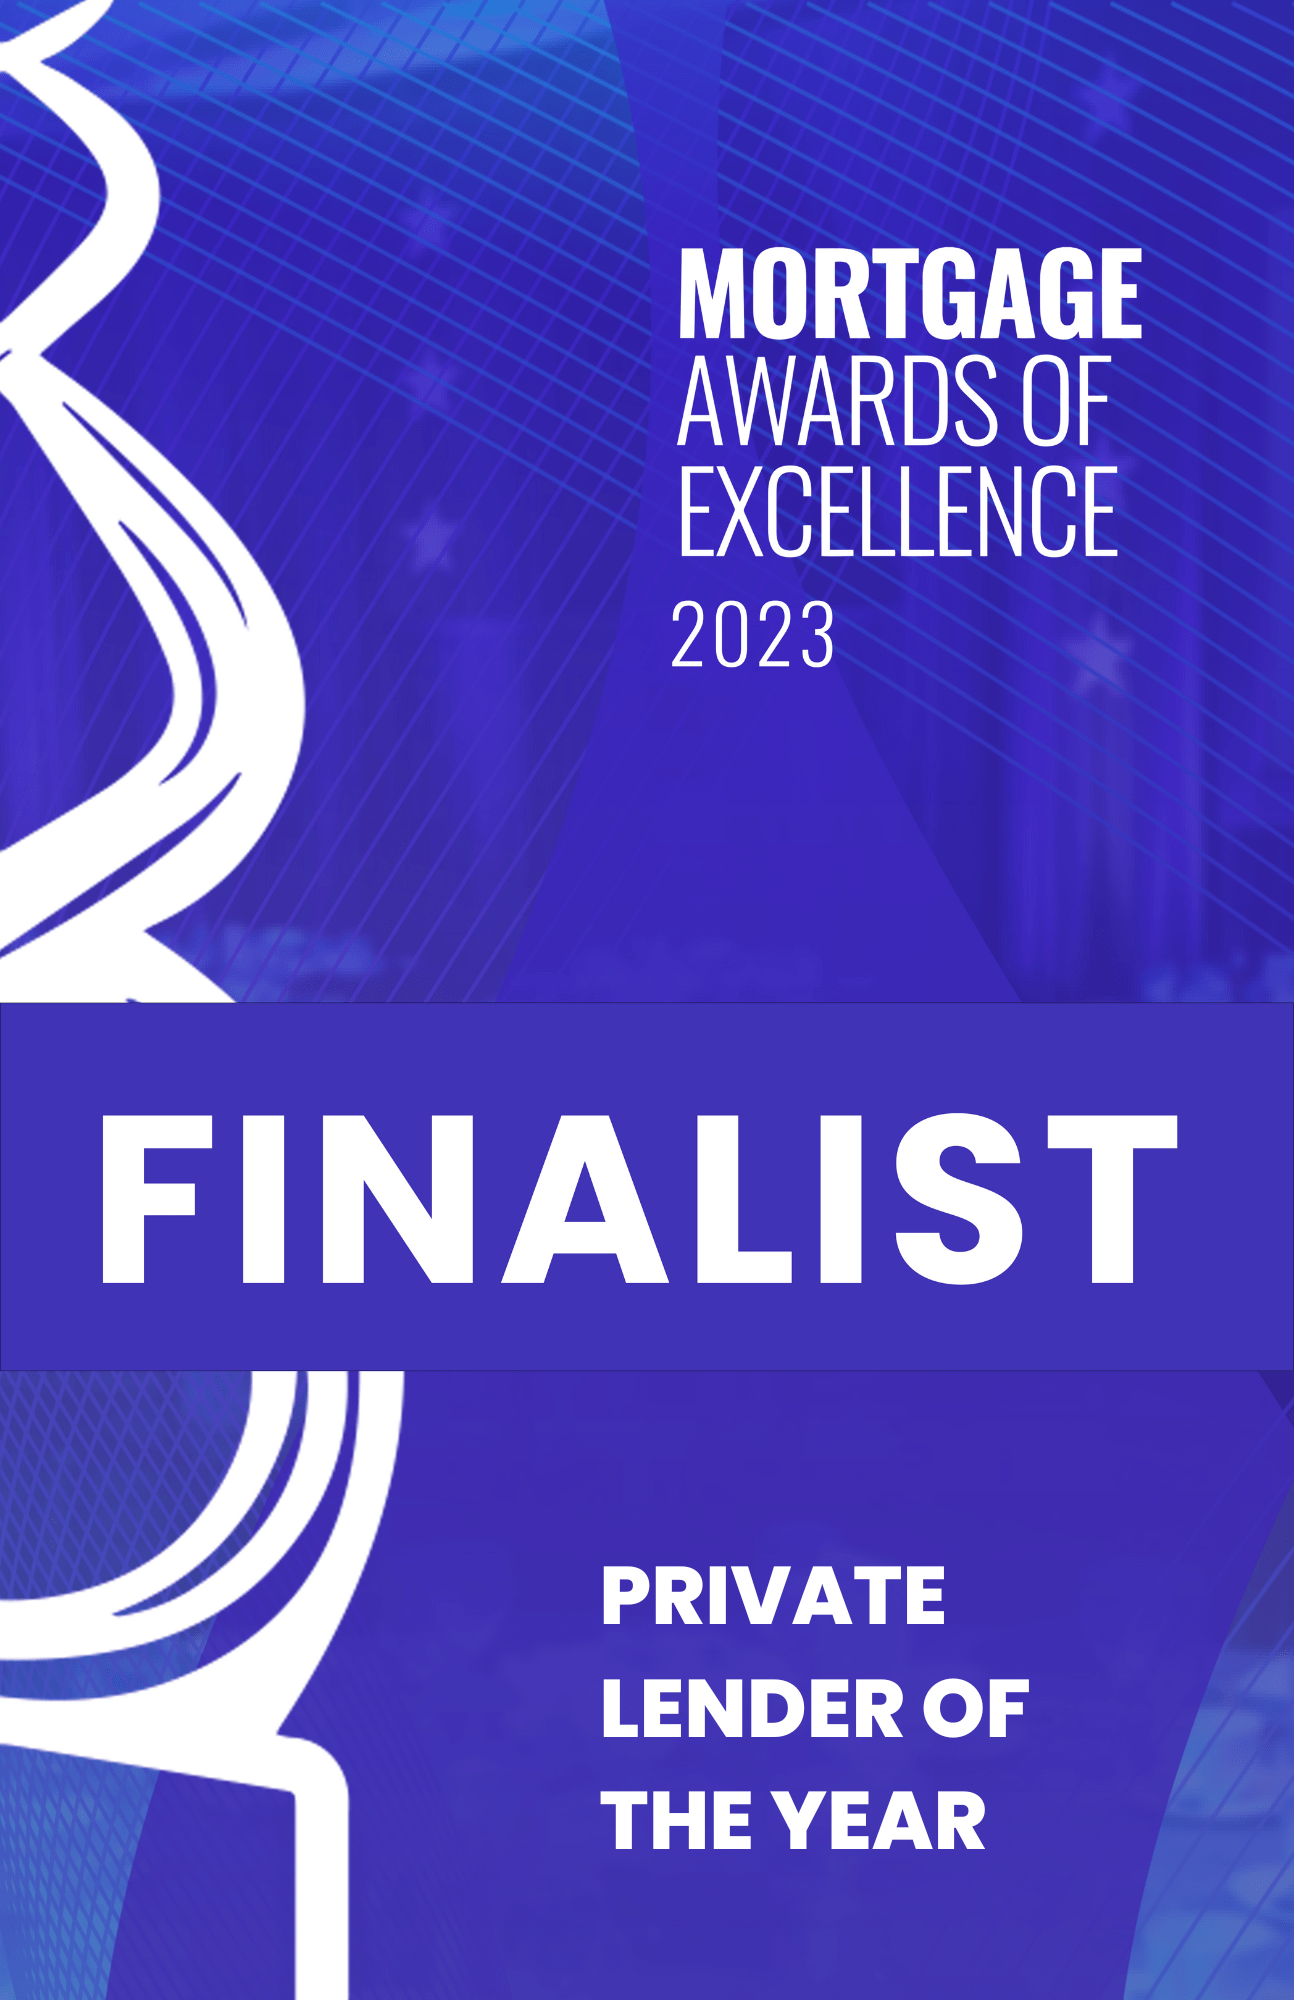 Mortgage Awards of Excellence 2023 FINALIST Private Lender of the Year